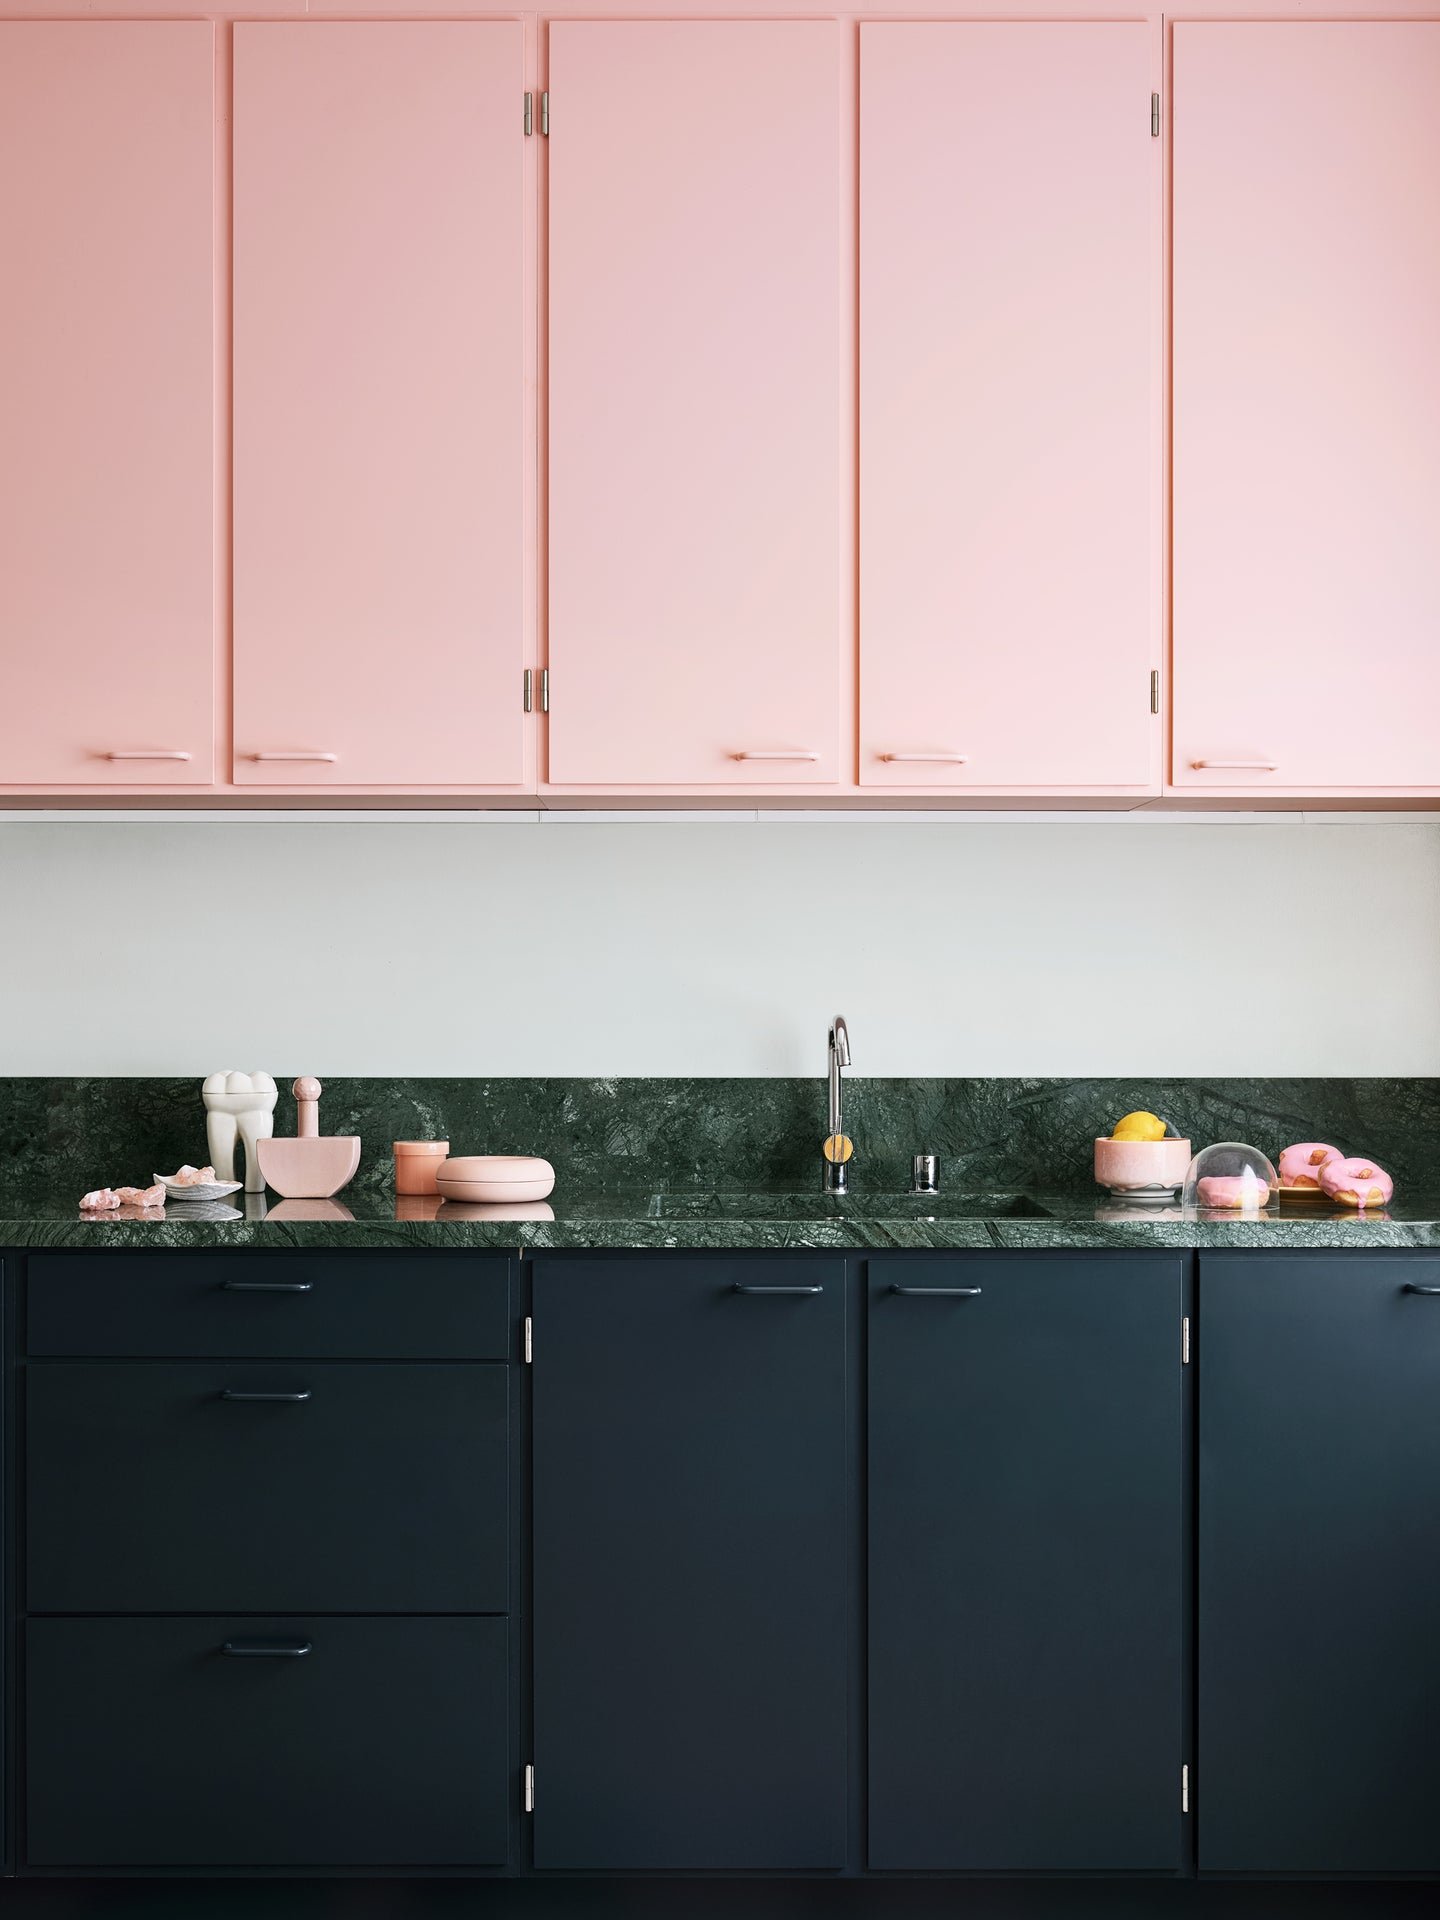 After This Design Trend Took Off, These Paint Colors Became 40% More Popular